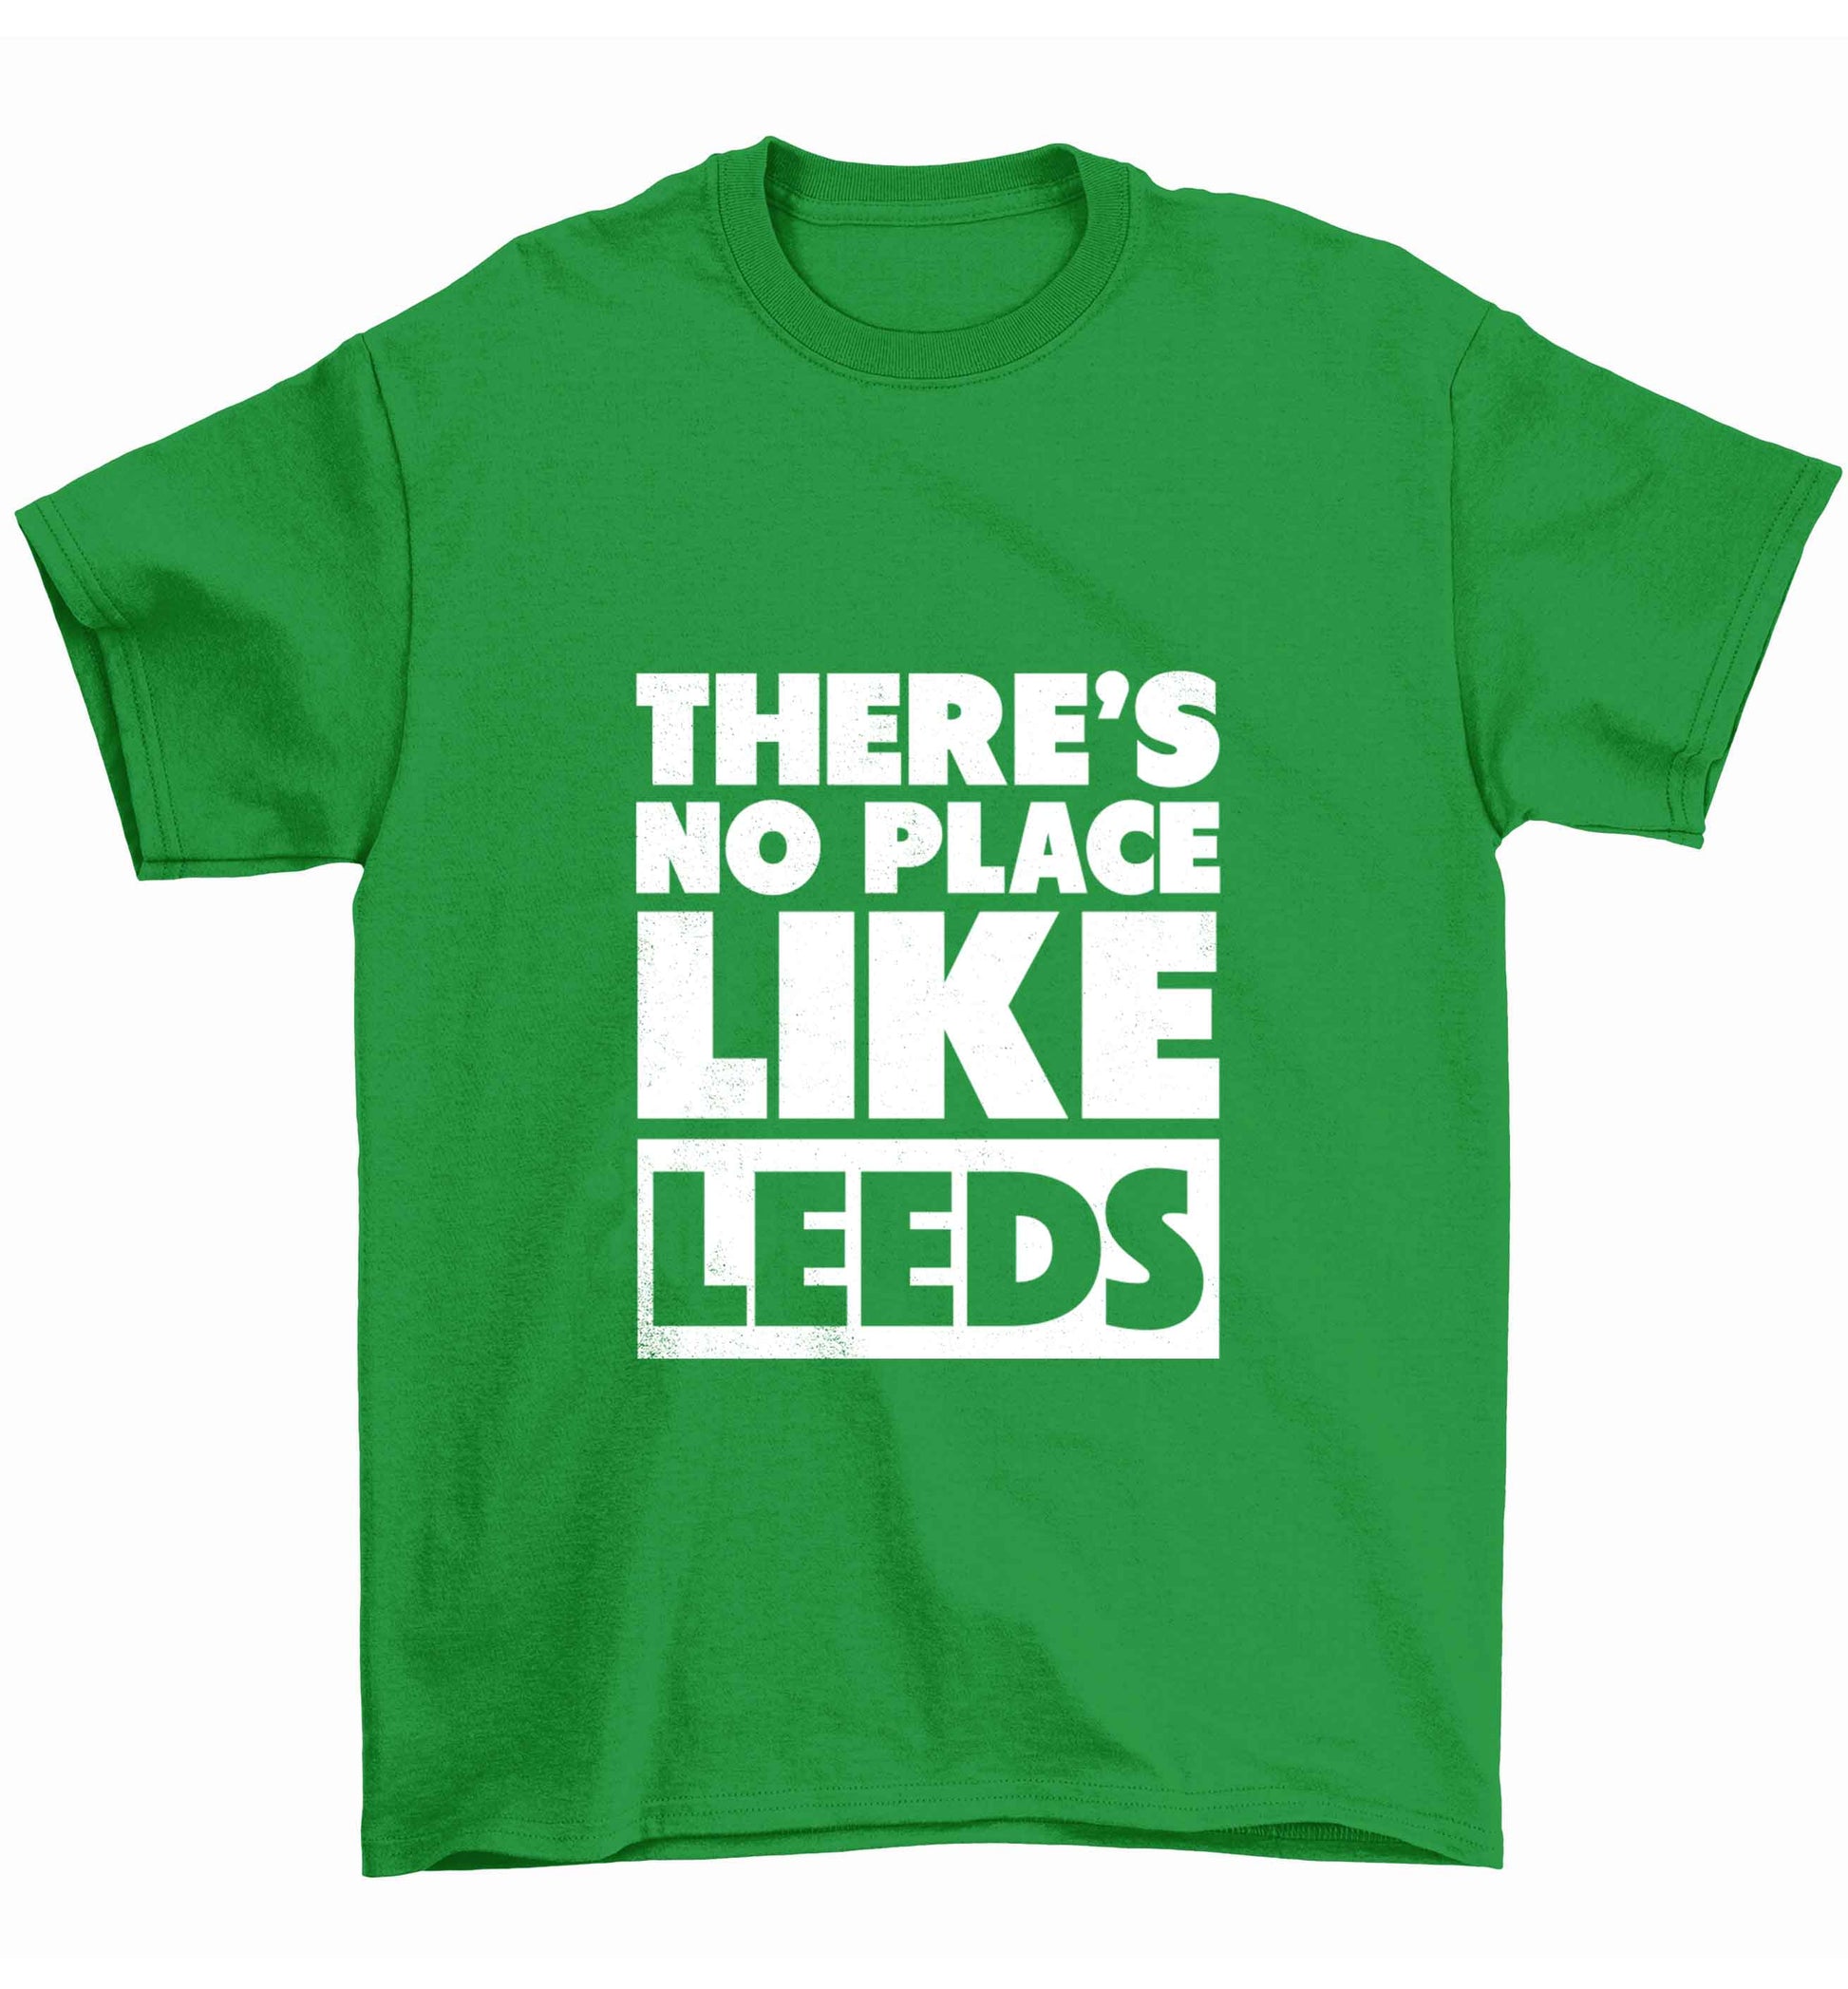 There's no place like Leeds Children's green Tshirt 12-13 Years